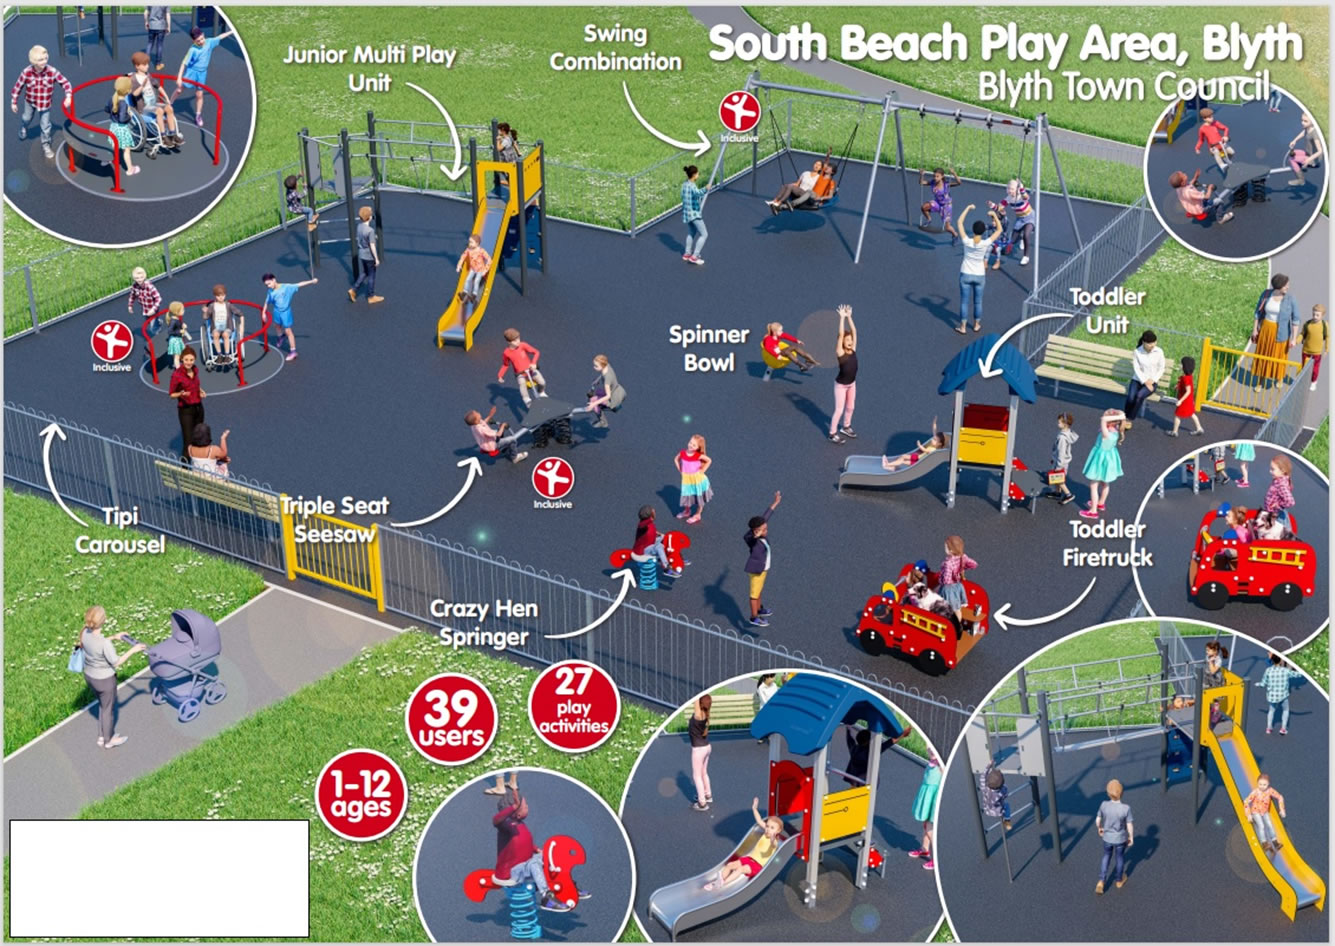 Further update on South Beach Play Area